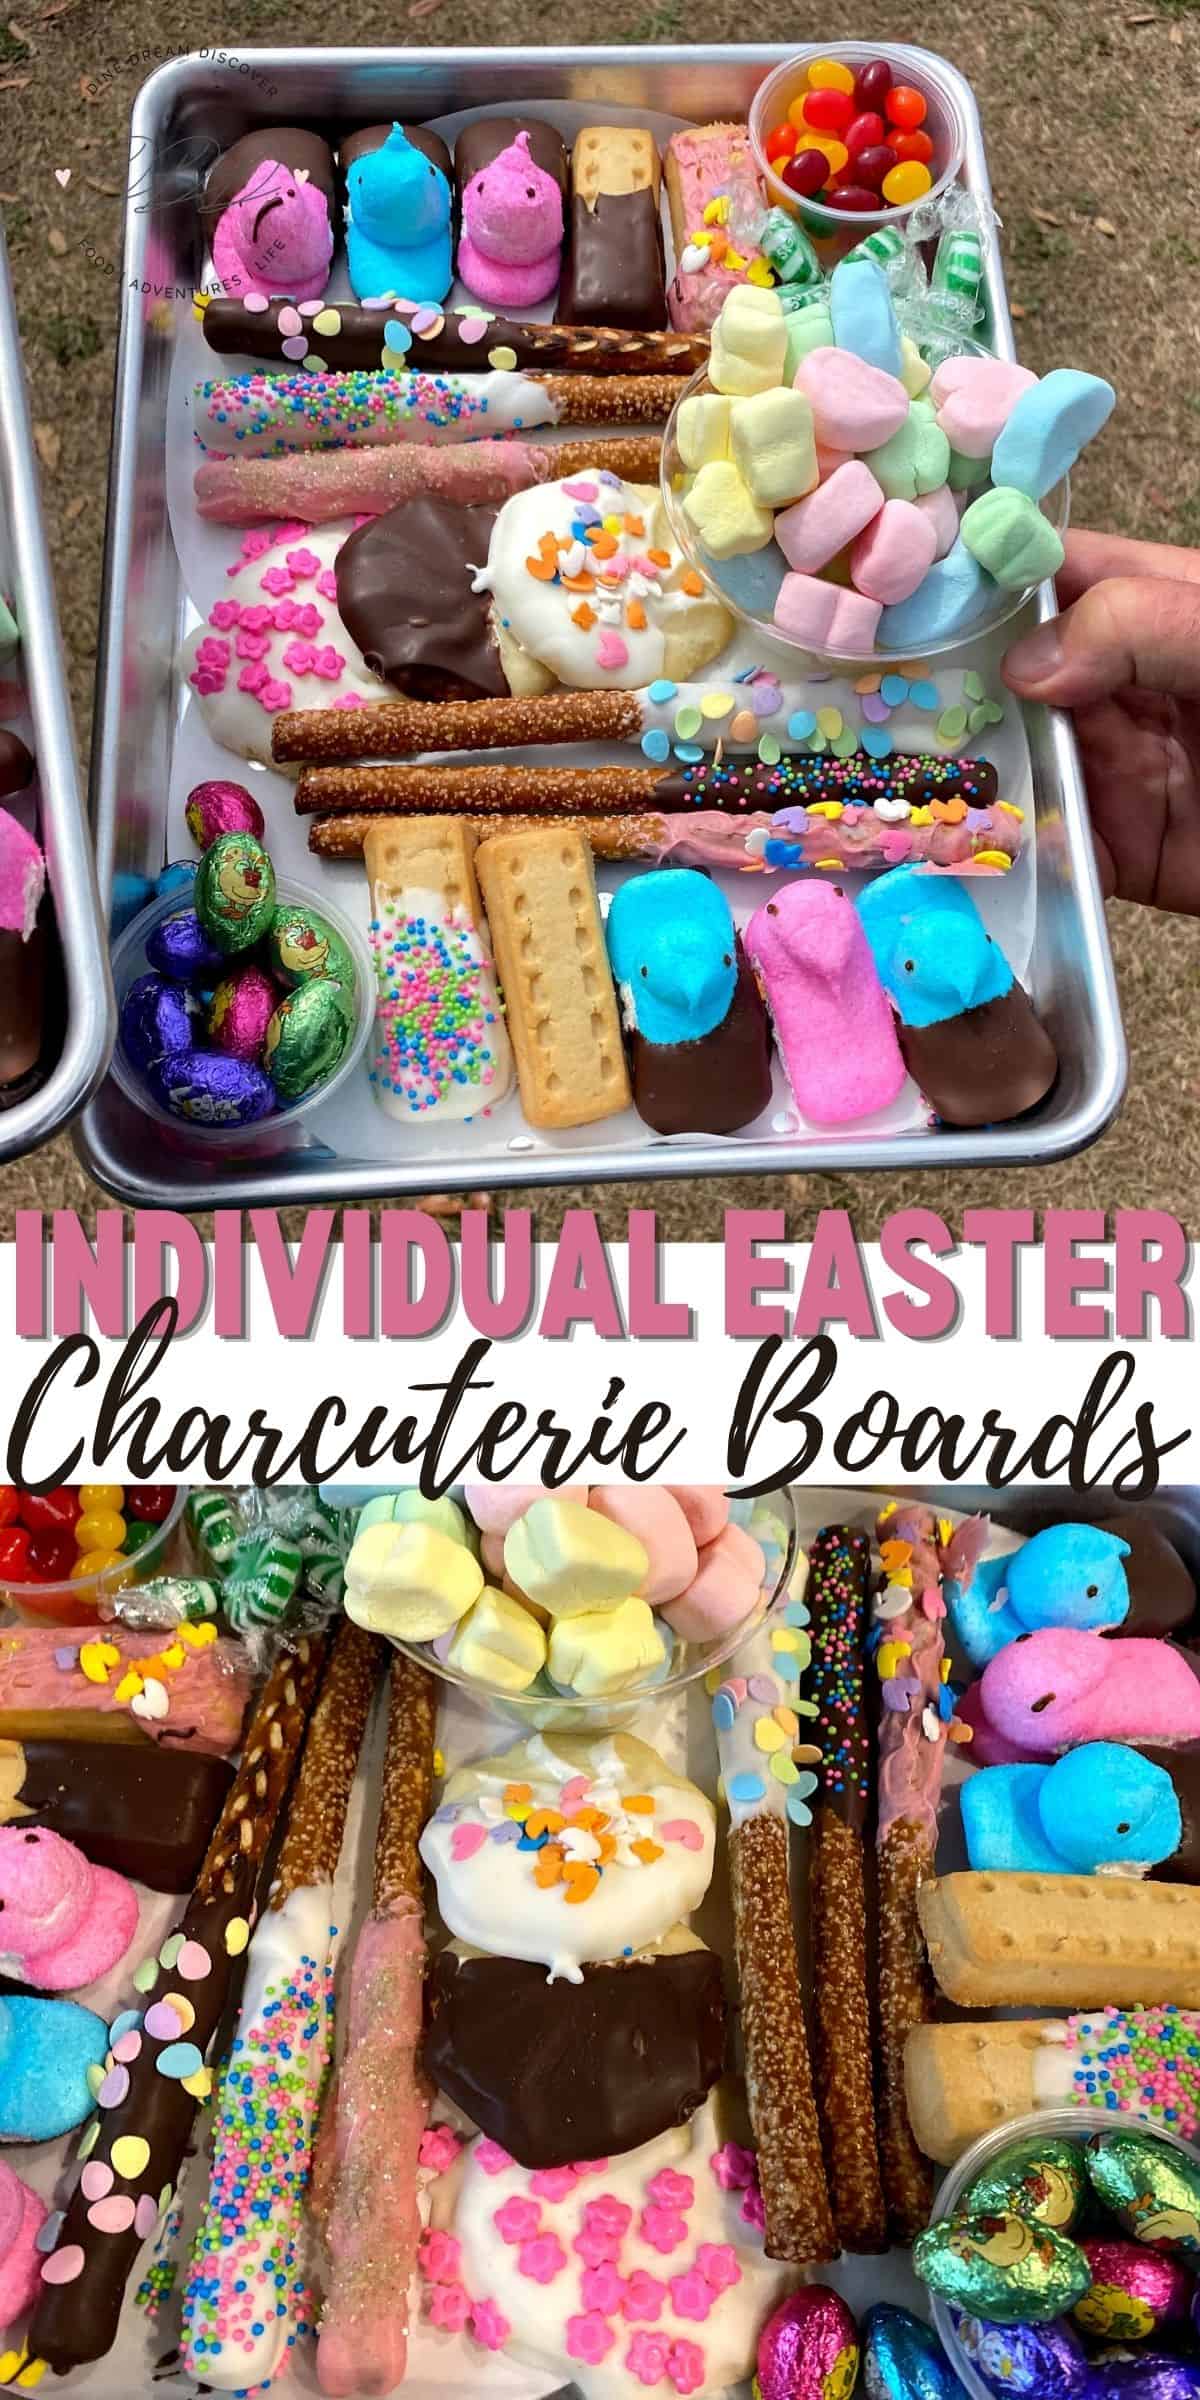 Individual Easter Charcuterie Boards